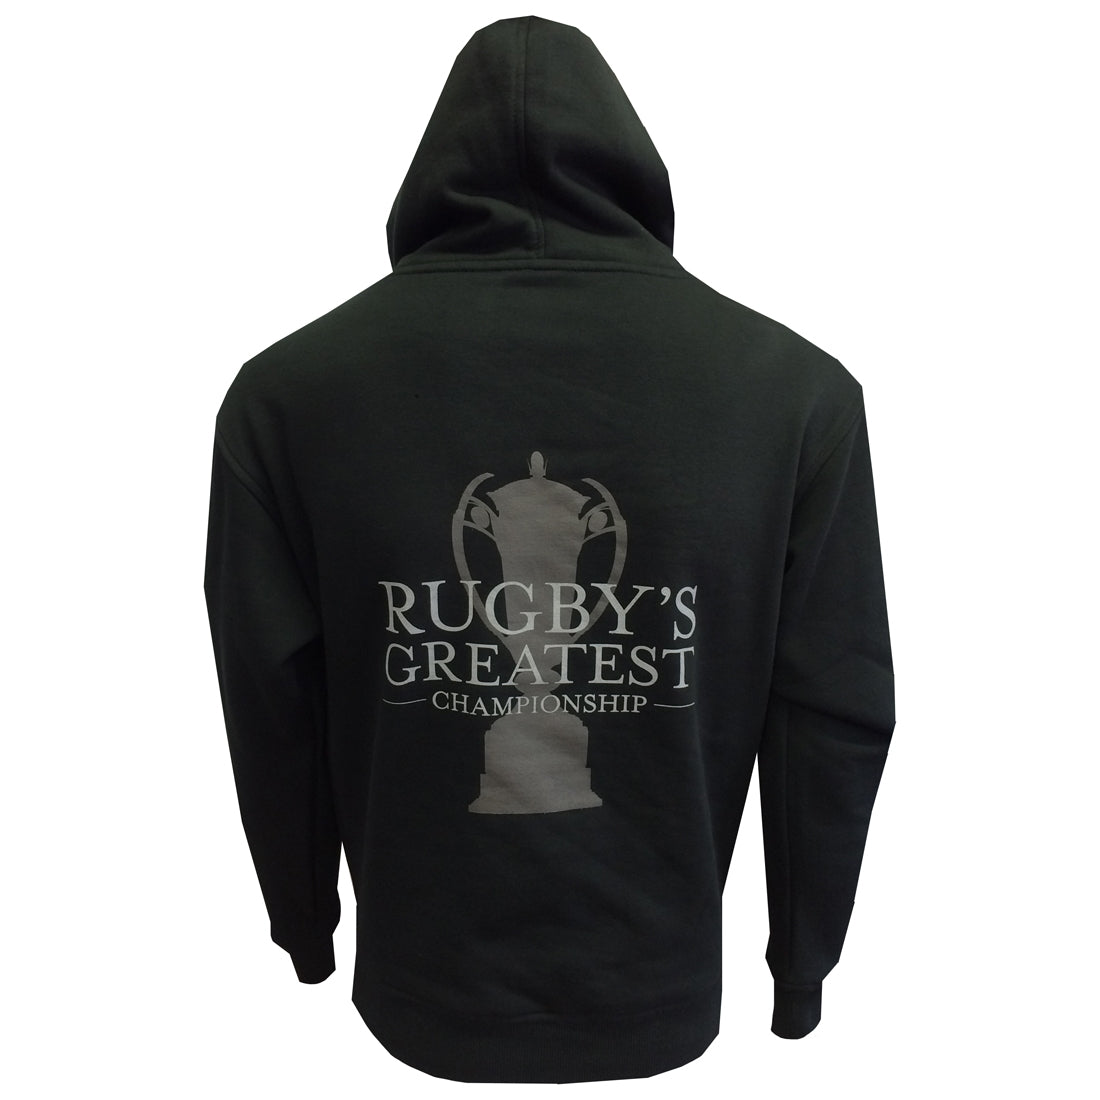 Guinness UK's ultimate Guinness 6 Nations Rugby Hoodie.